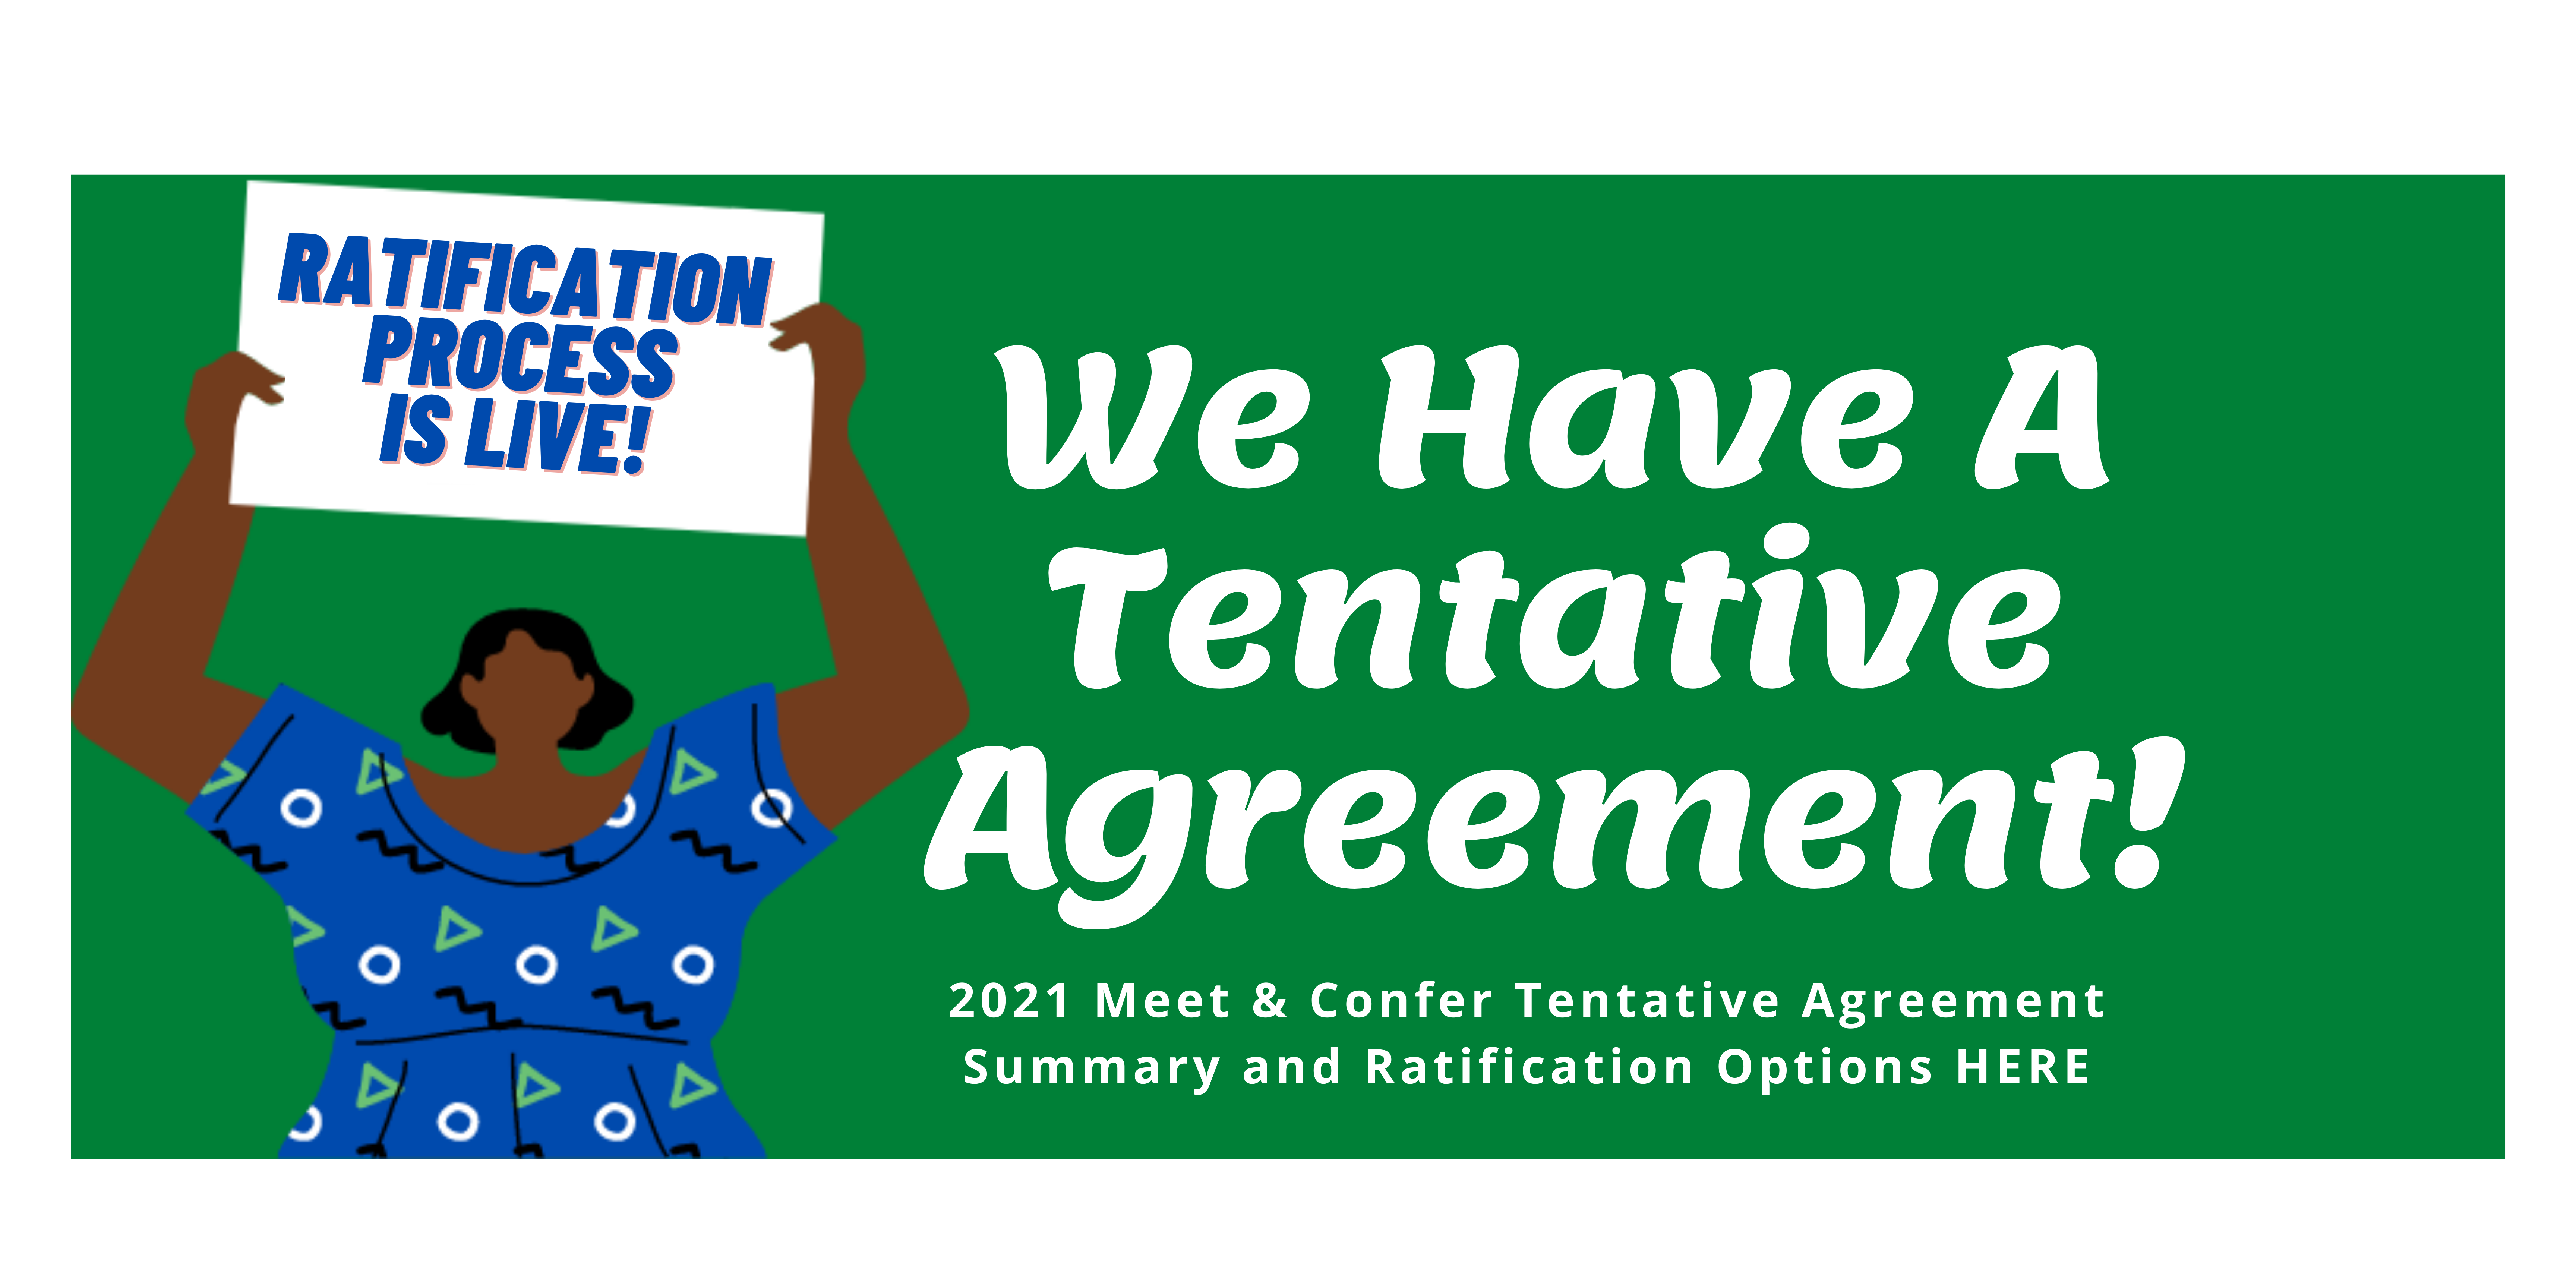 HOPE 2021 Meet and Confer NEW Tentative Agreement and Ratification Options